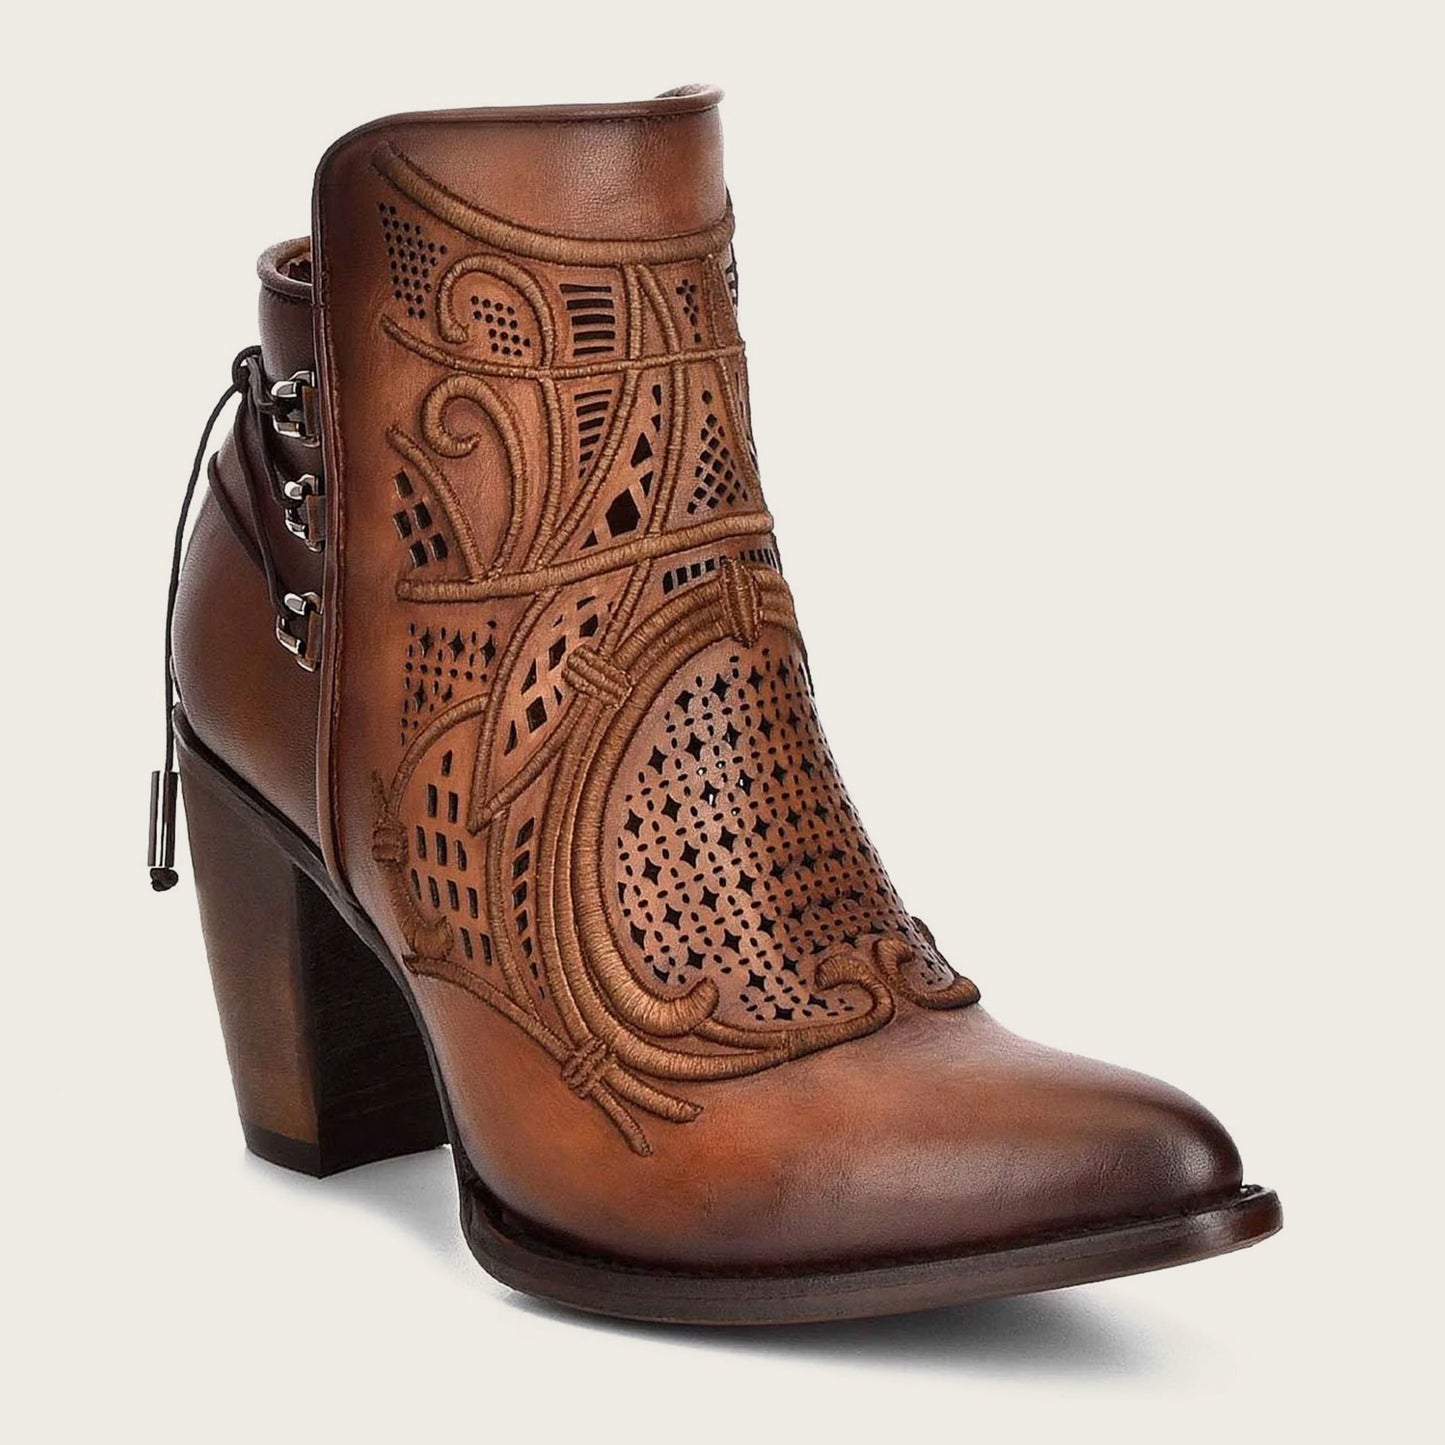 Embroidered honey leather bootie with organic motifs and metallic details.